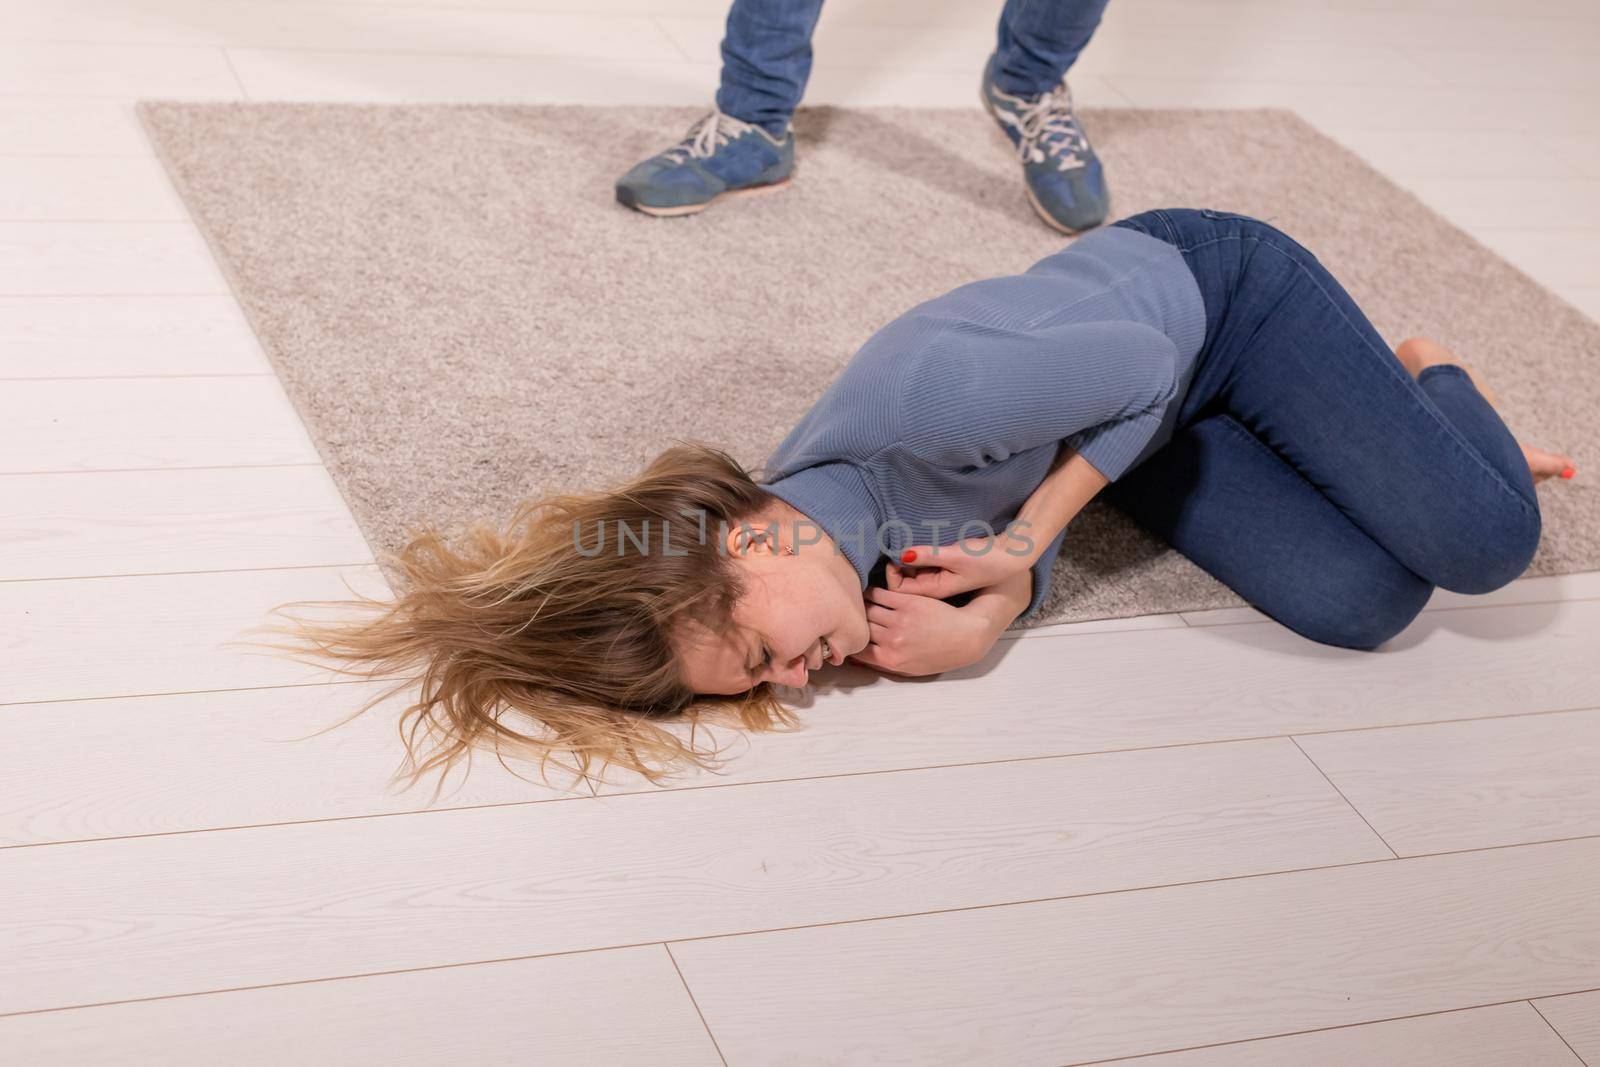 people, abuse and violence concept - woman threatened by husband lying on floor by Satura86